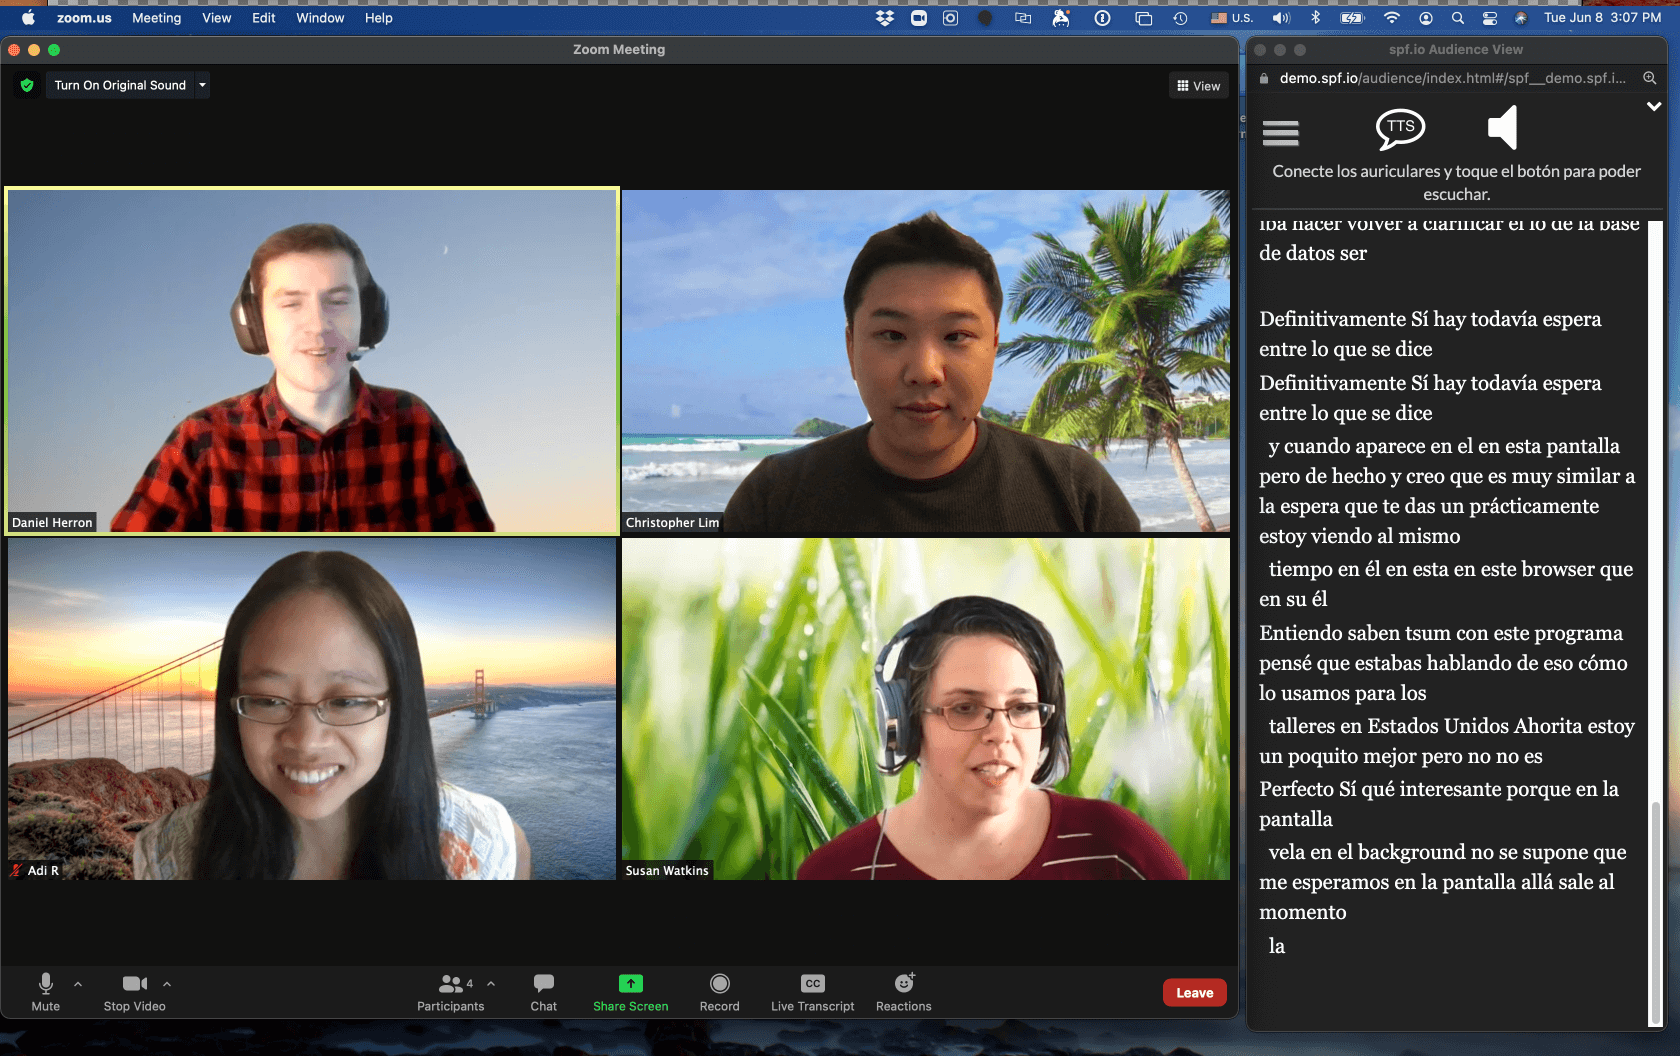 Access spf.io translation online, side to side with online video call